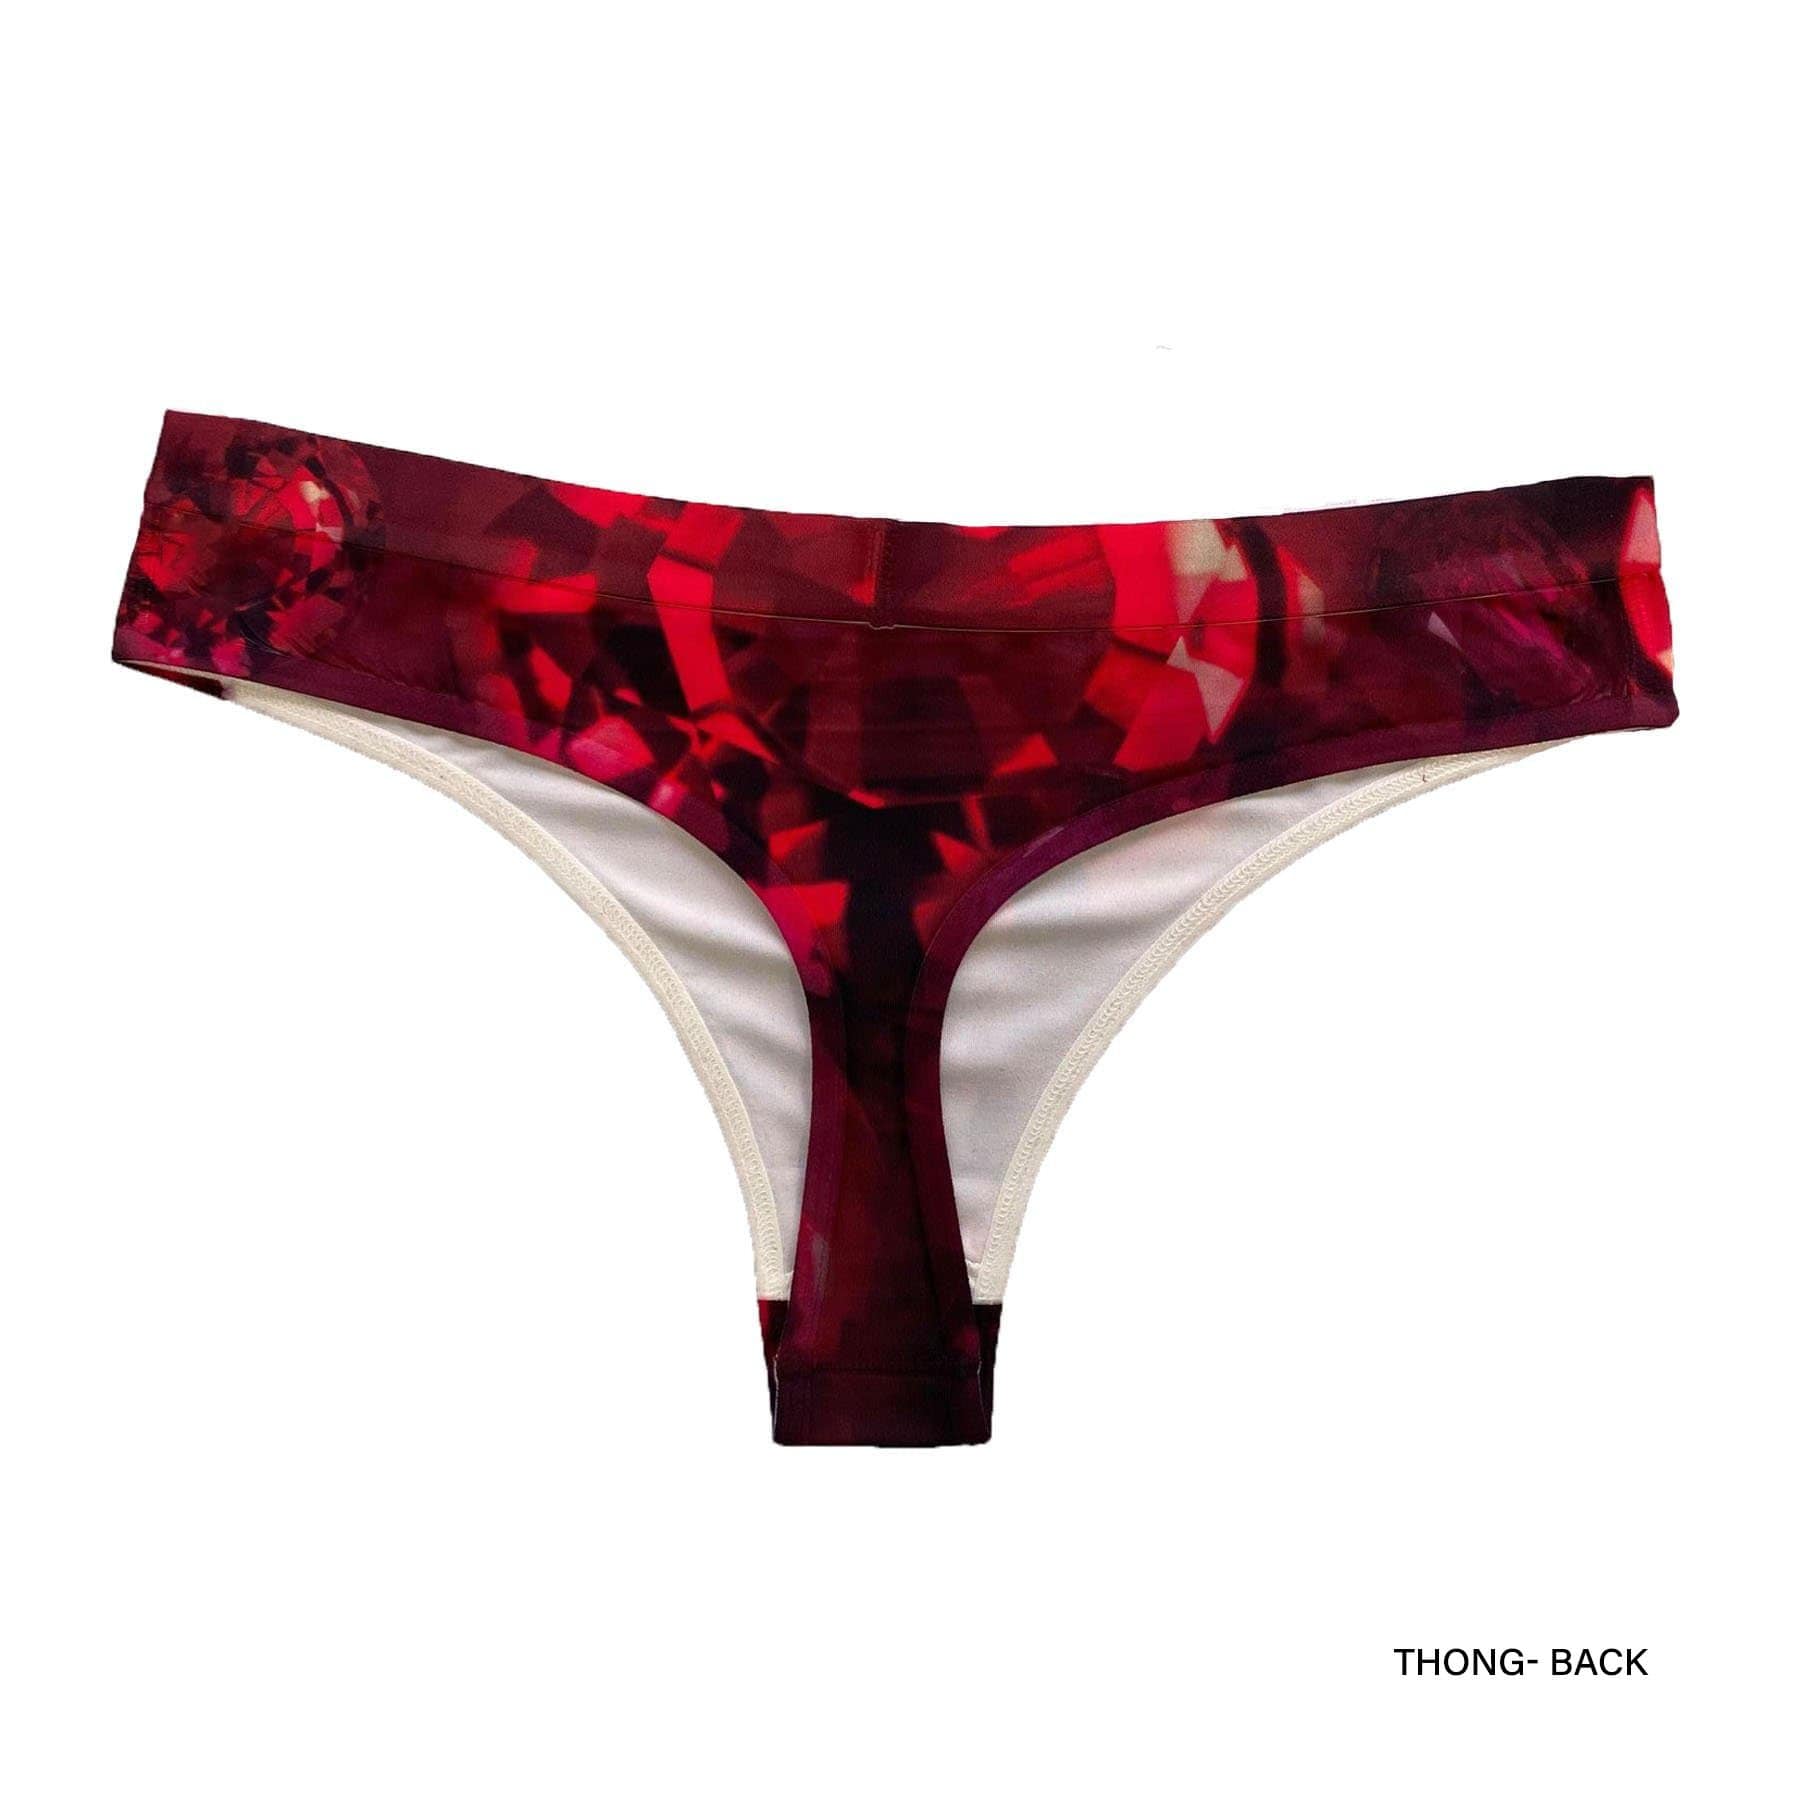 Dye Sublimation Thong Underwear Mockup Add Your Own Image and Background 